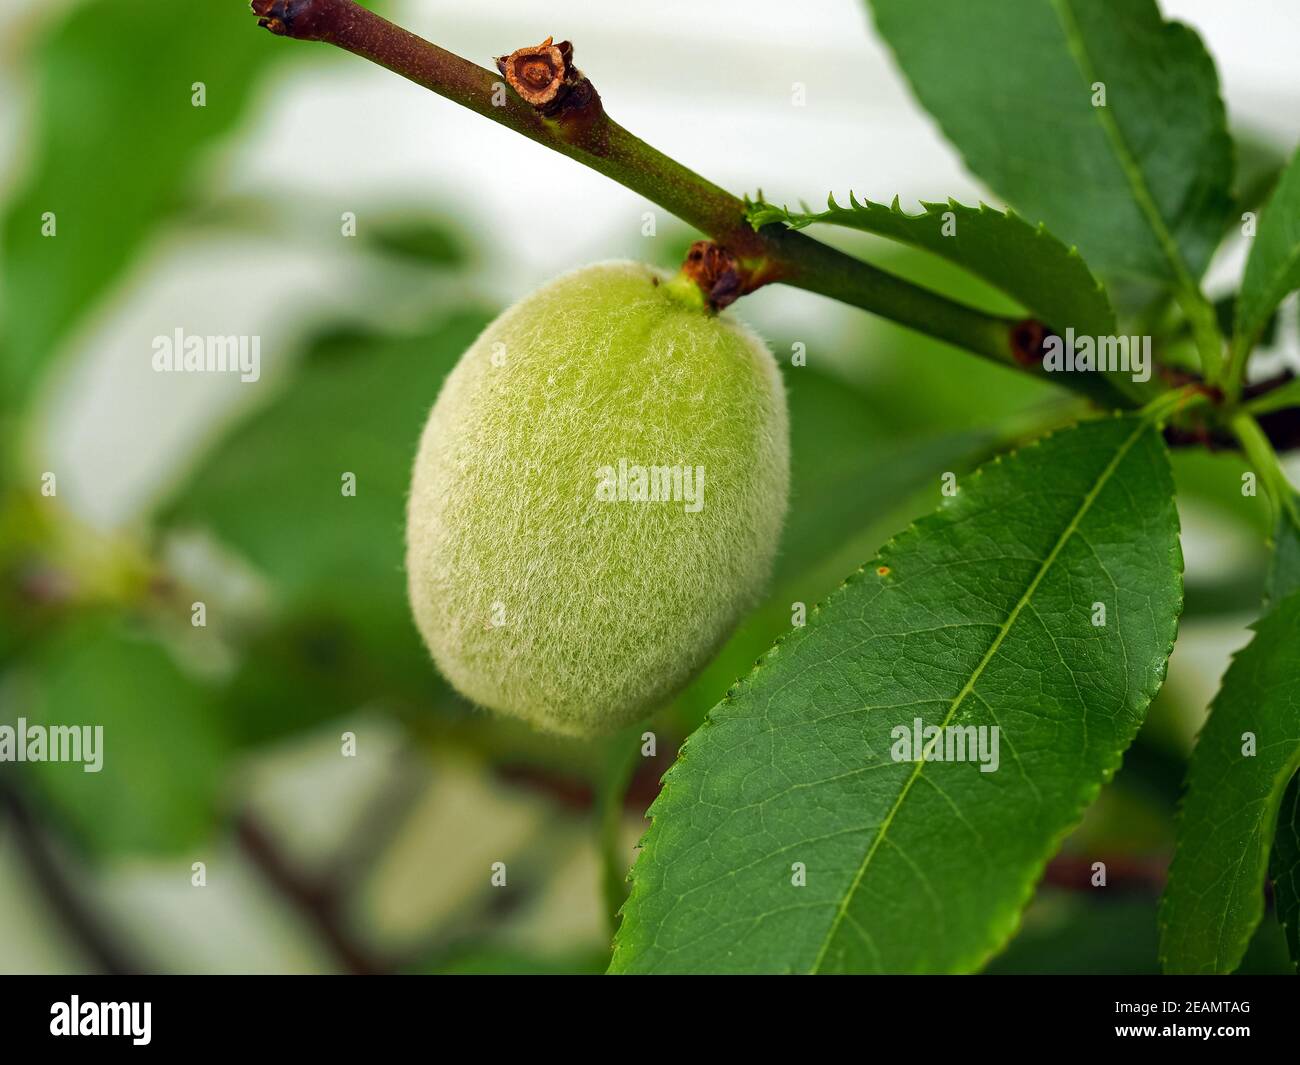 Peach fruit developing on a tree branch Stock Photo